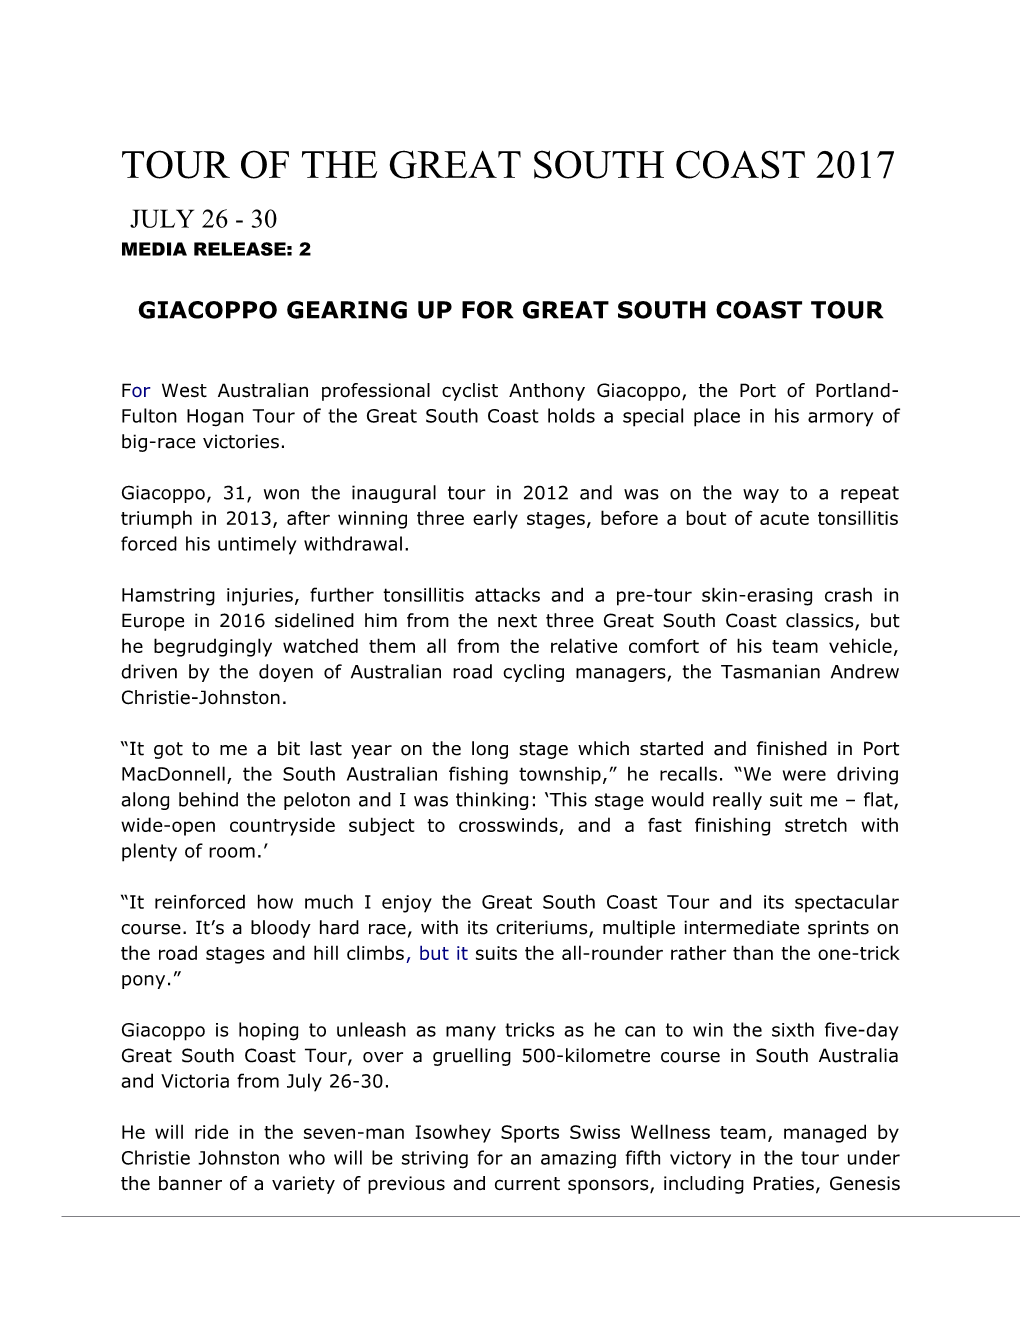 Giacoppo Gearing up for Great South Coast Tour